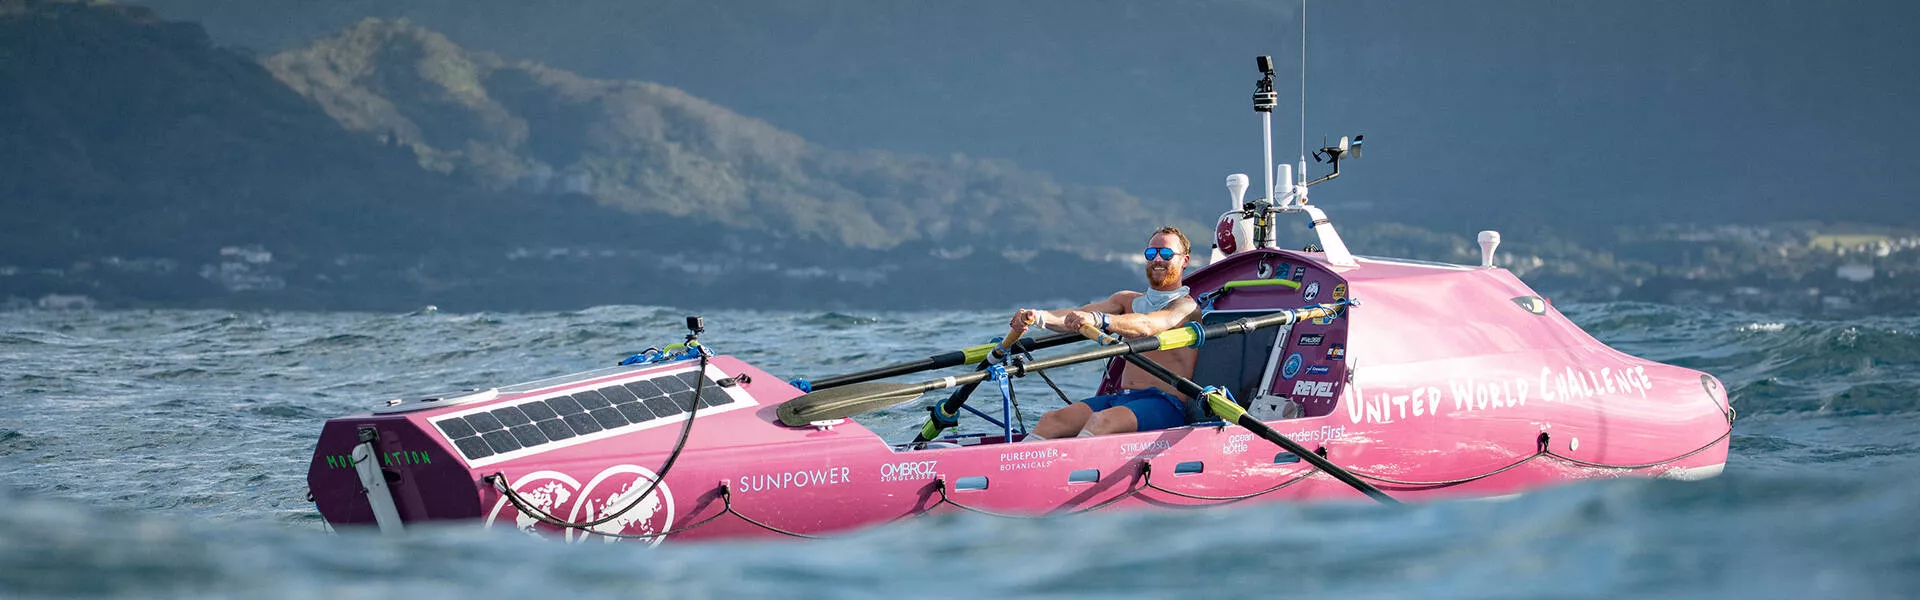 Tez Steinberg makes history rowing 3,000 km across the Pacific Ocean 